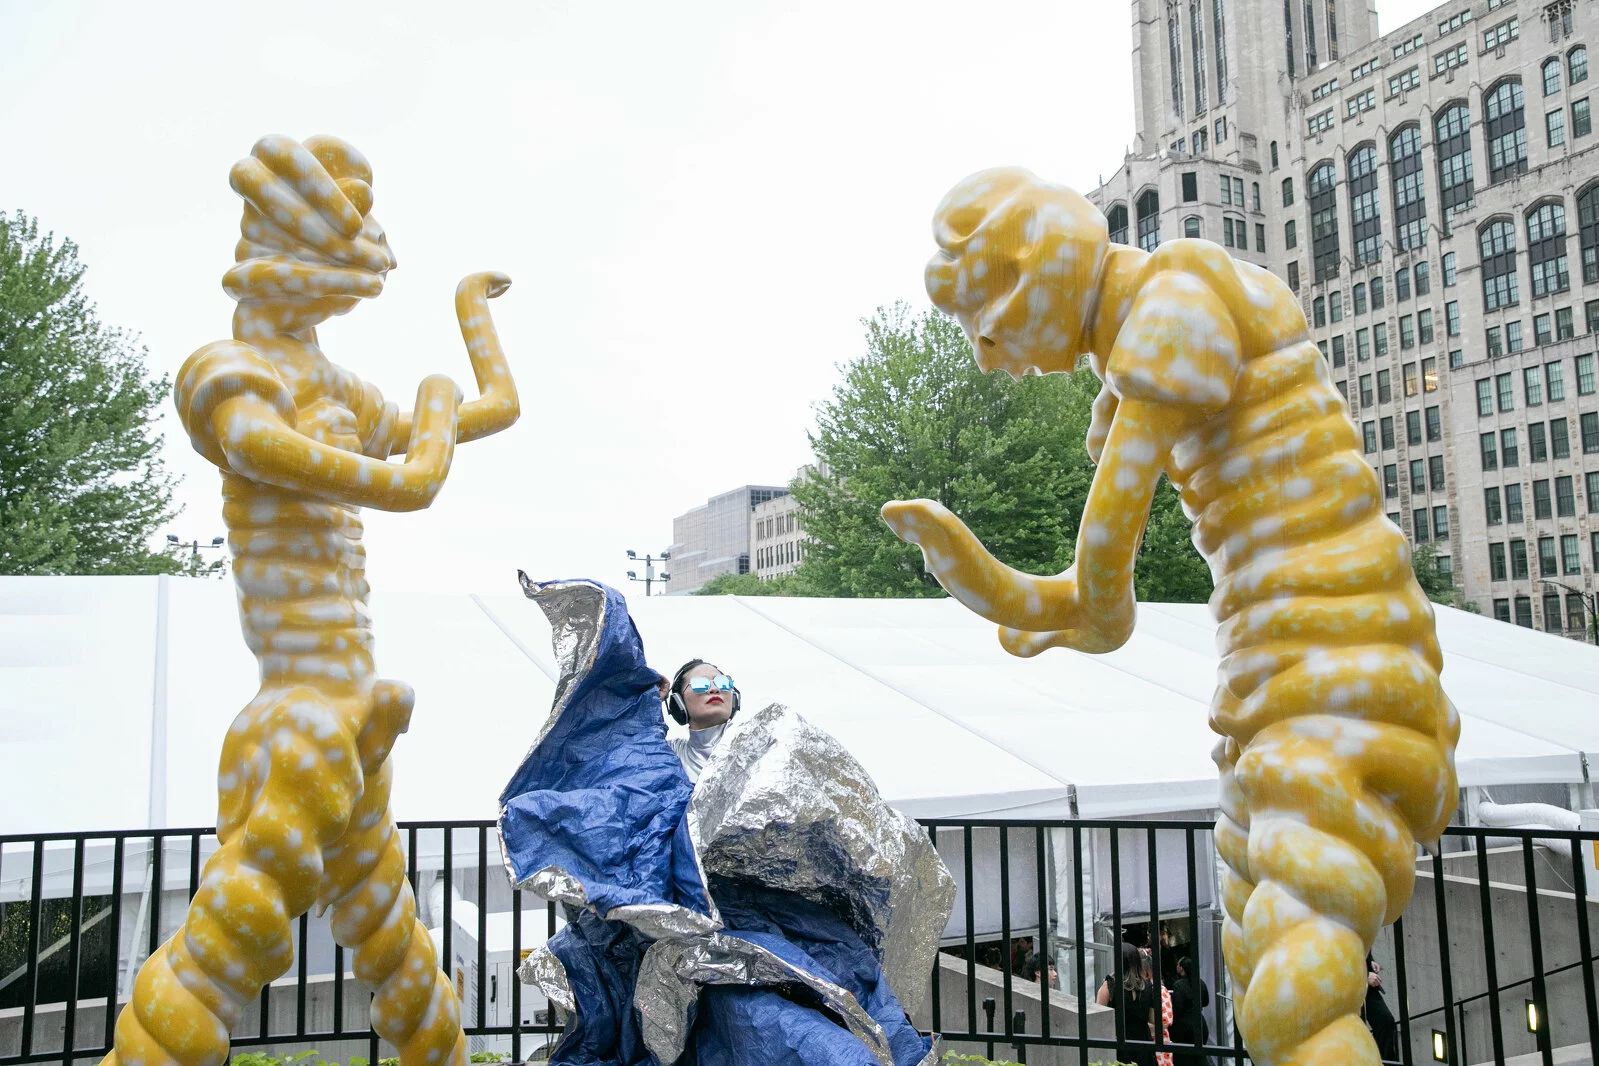 A person in a blue and silver outfit poses flamenco style between two larger-than-life yellow and white sculptures of humanoid figures in different dancing poses.